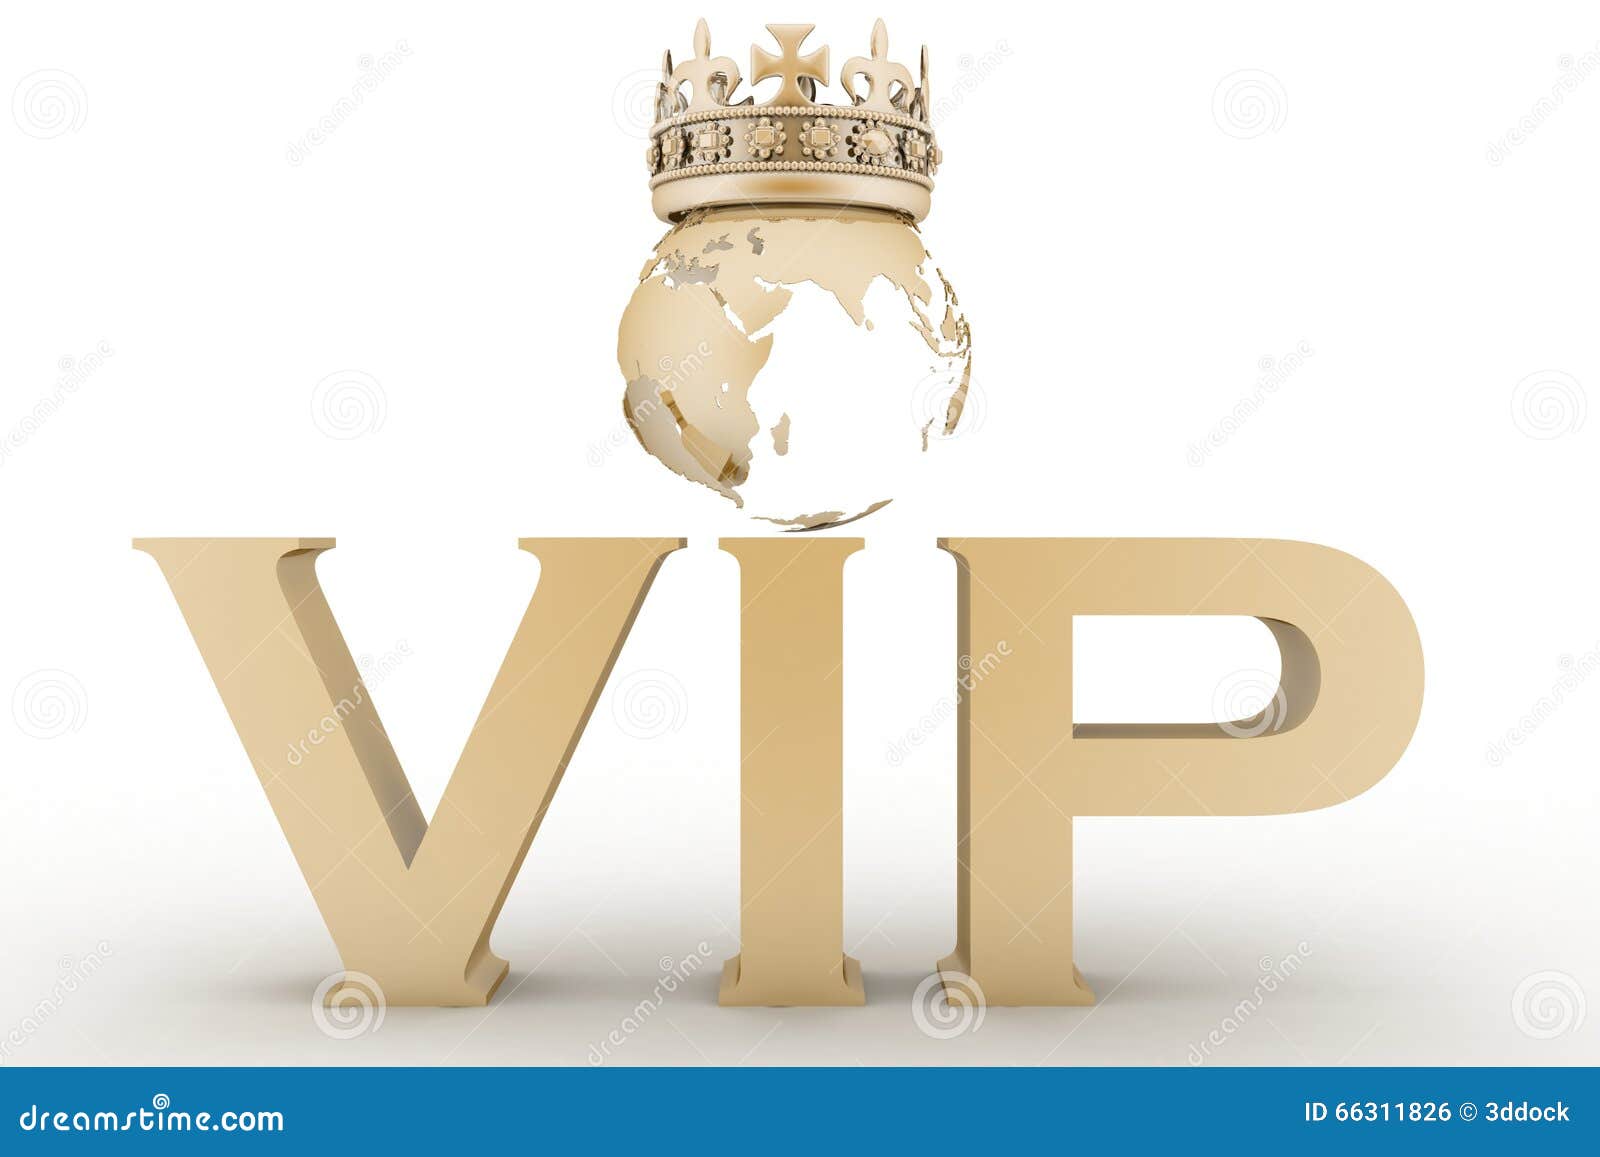 vip abbreviation with a crown